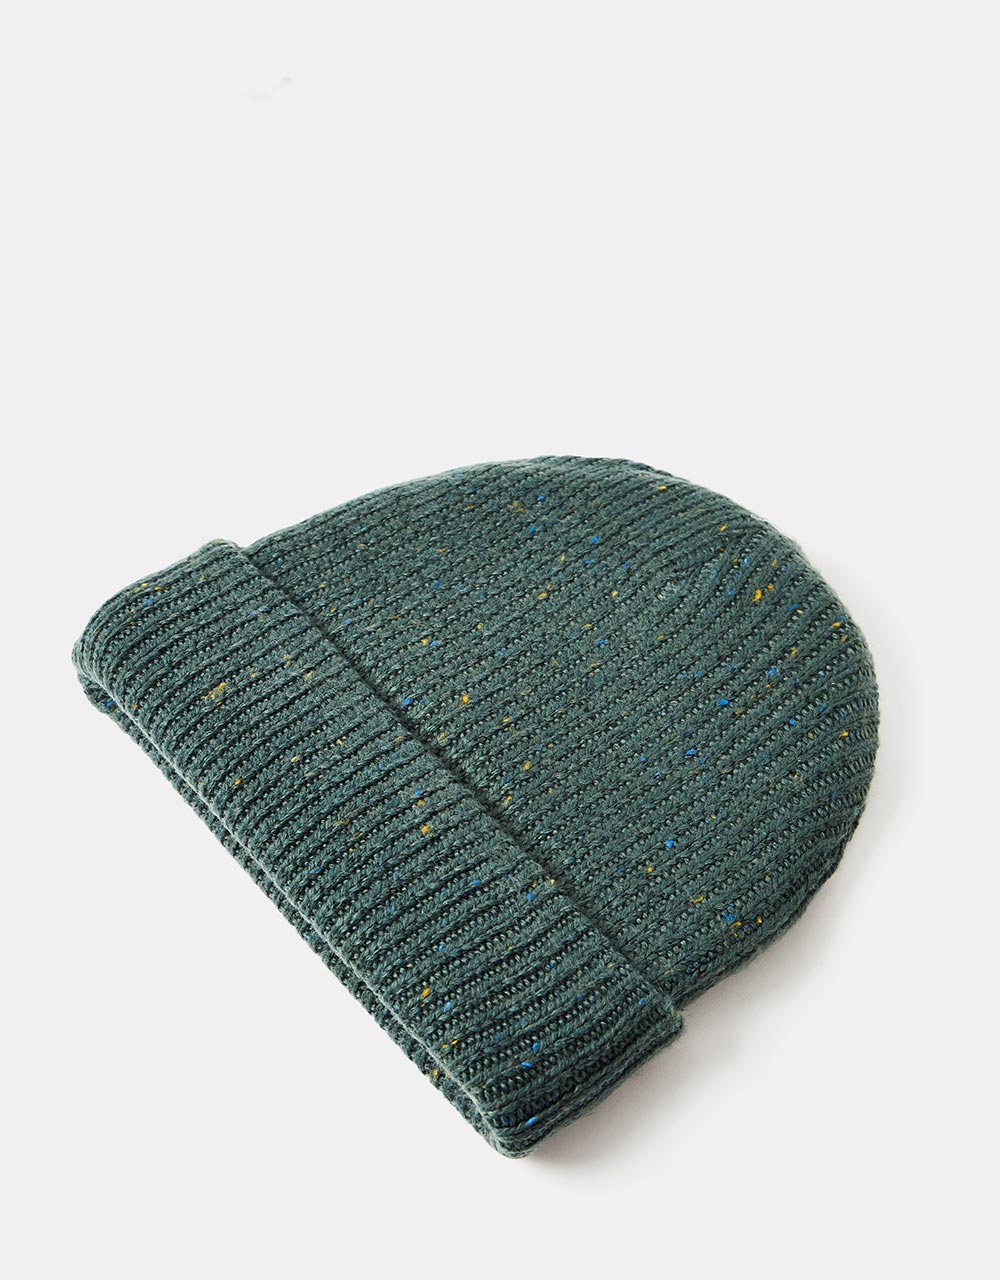 Route One Recycled Fleck Beanie - Forest Green